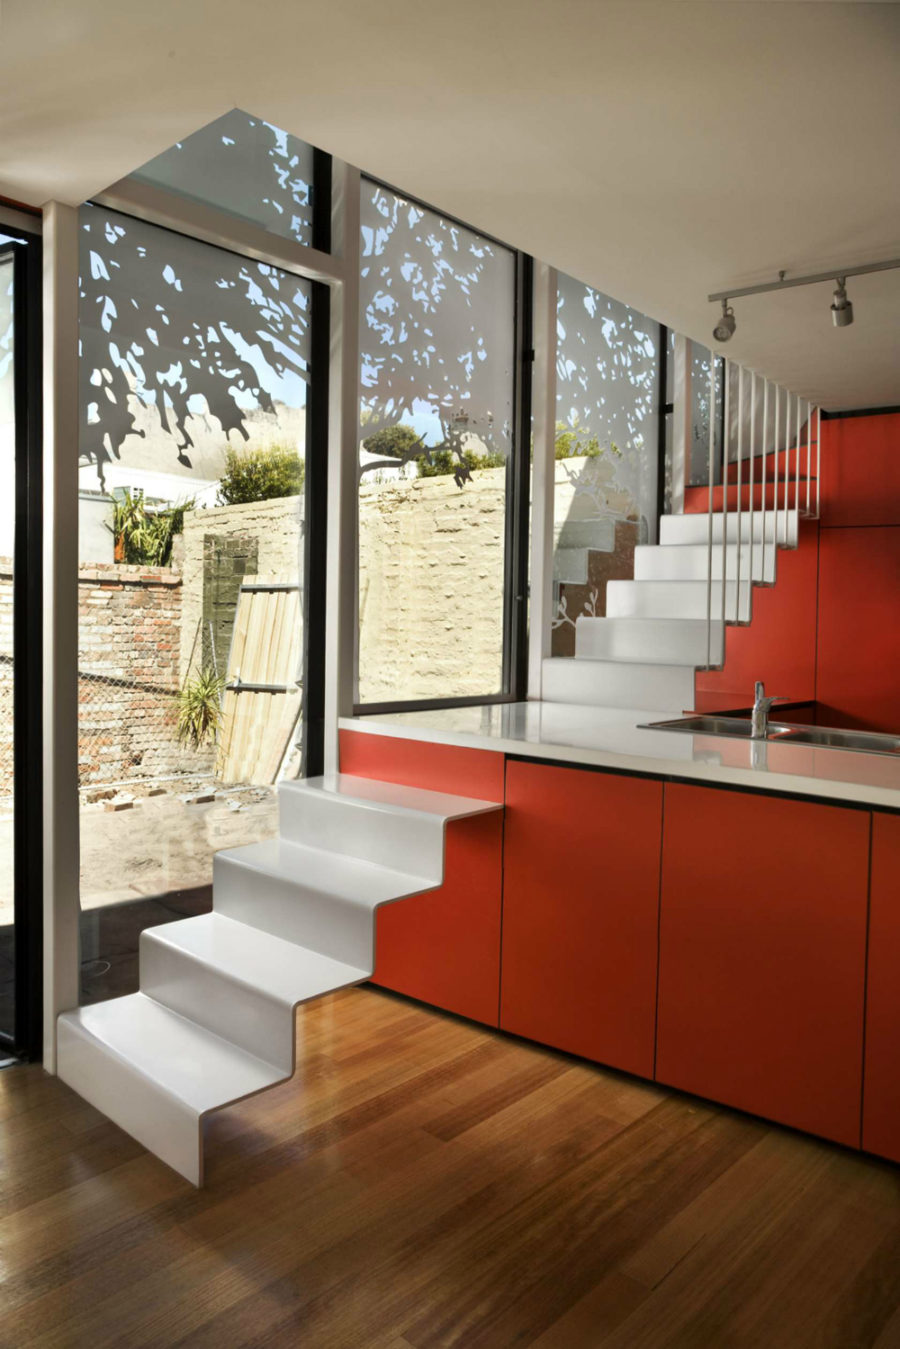 Andrew Maynard Architects put a staircase through the kitchen island